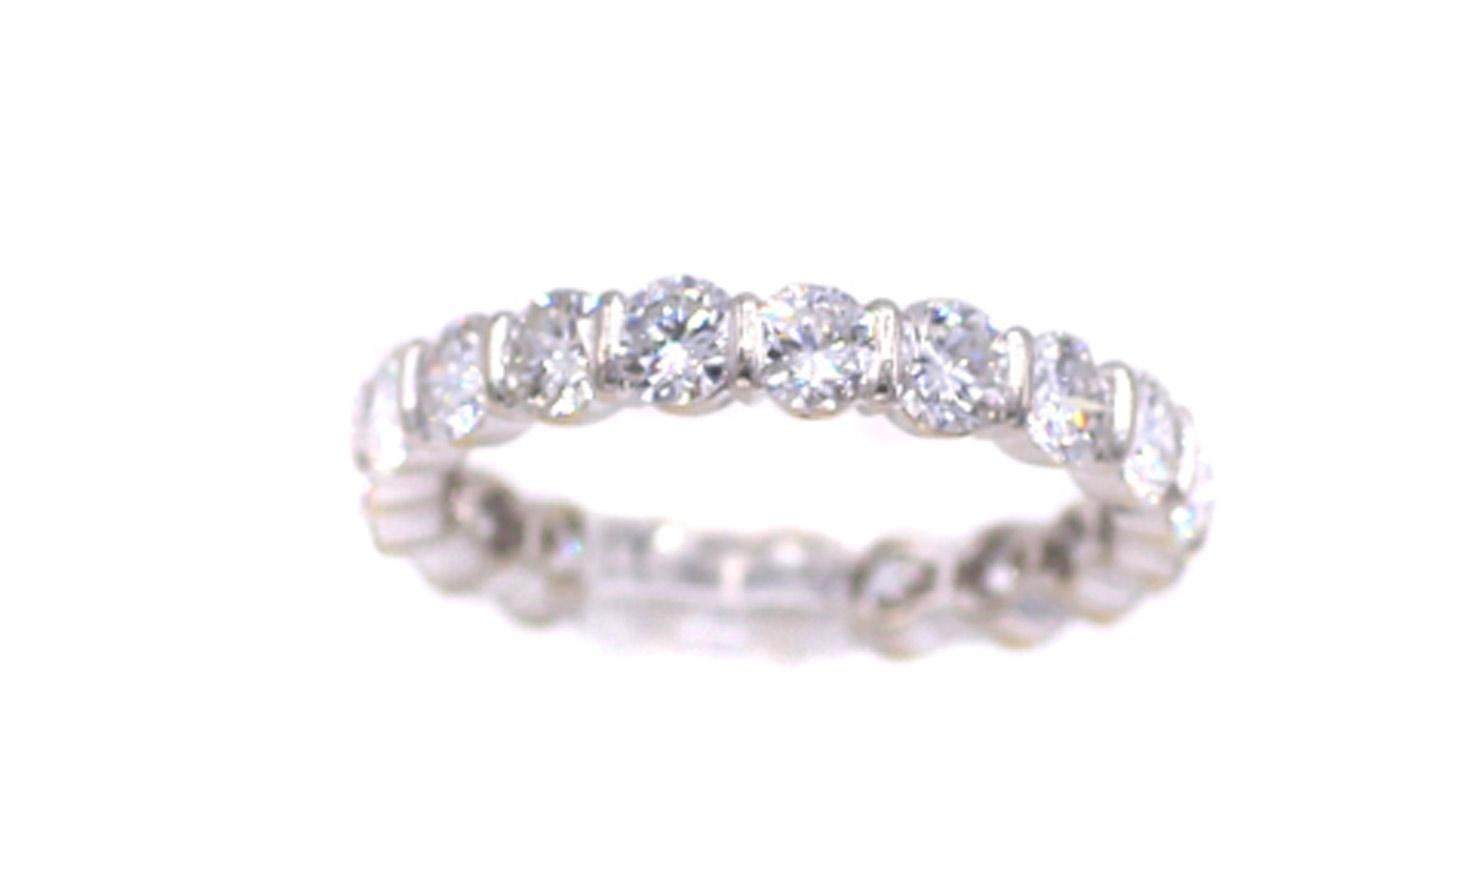 Beautifully well handcrafted 18 karat white gold diamond eternity band set with 18 perfectly matched bright white and lively round brilliant cut diamonds. The average color and clarity has been graded as F VS. Measured to weigh approximately 3.35